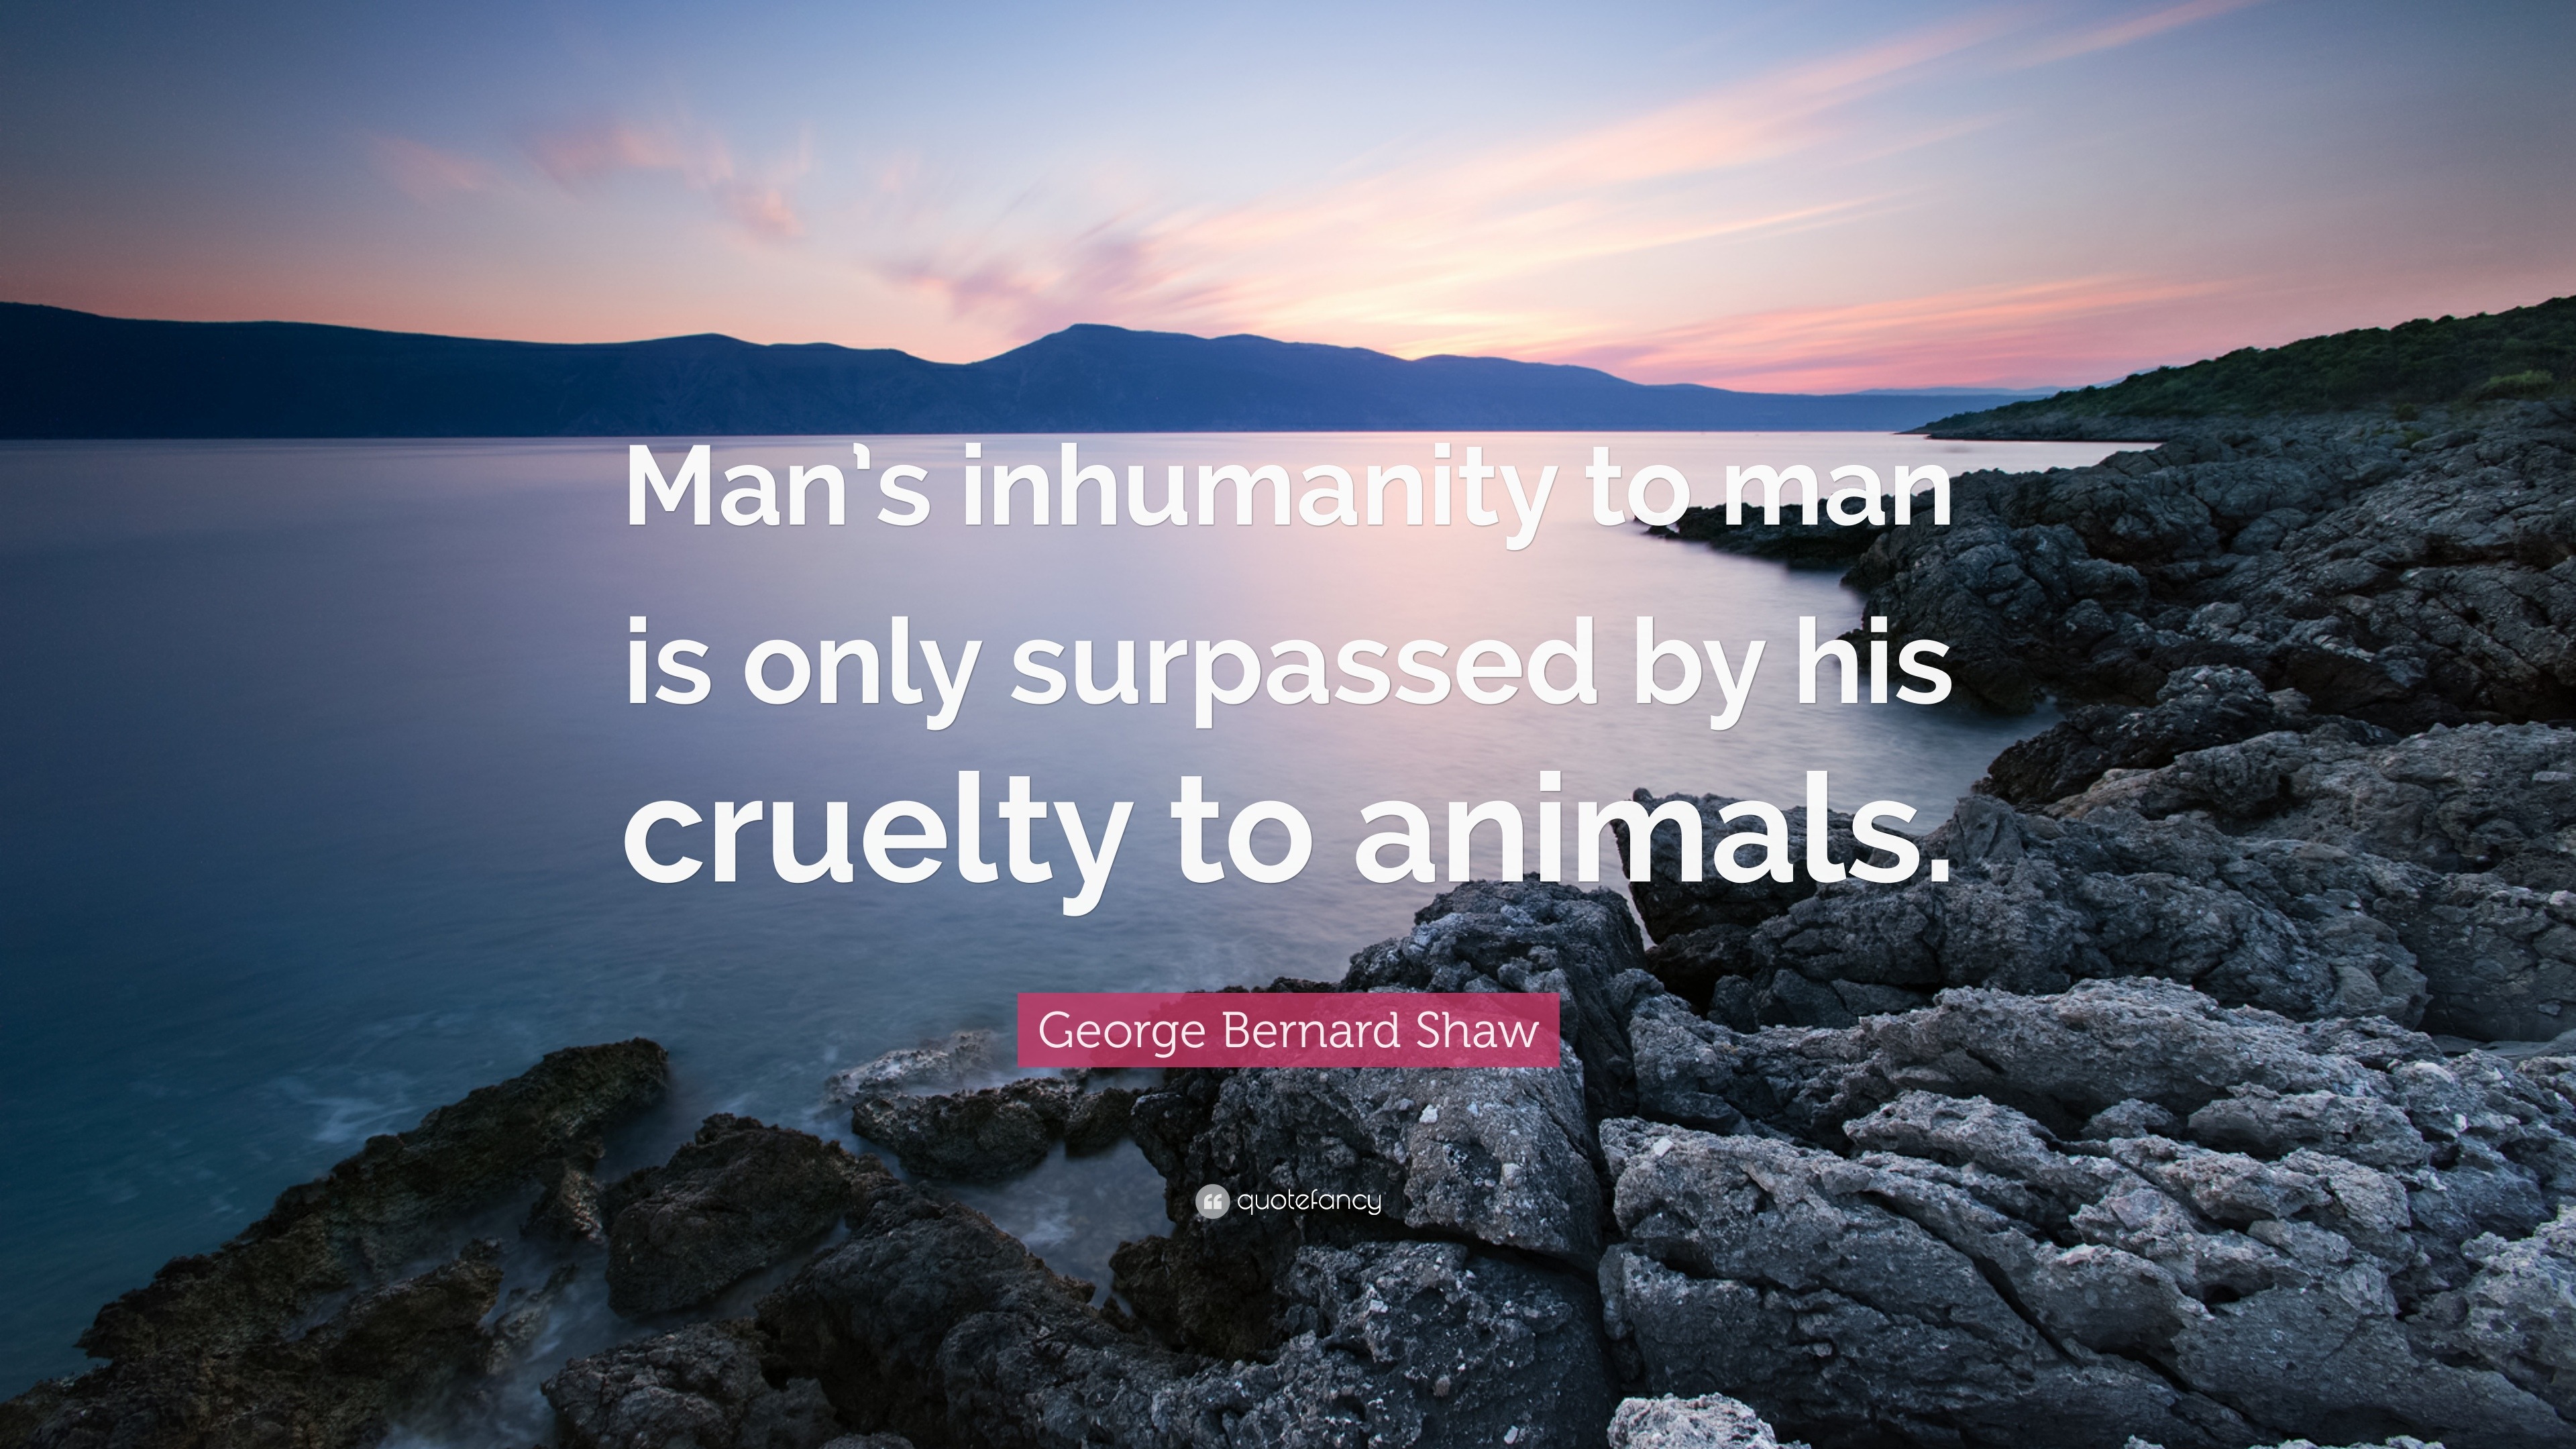 George Bernard Shaw Quote: “Man's Inhumanity To Man Is Only Surpassed By His Cruelty To Animals.”